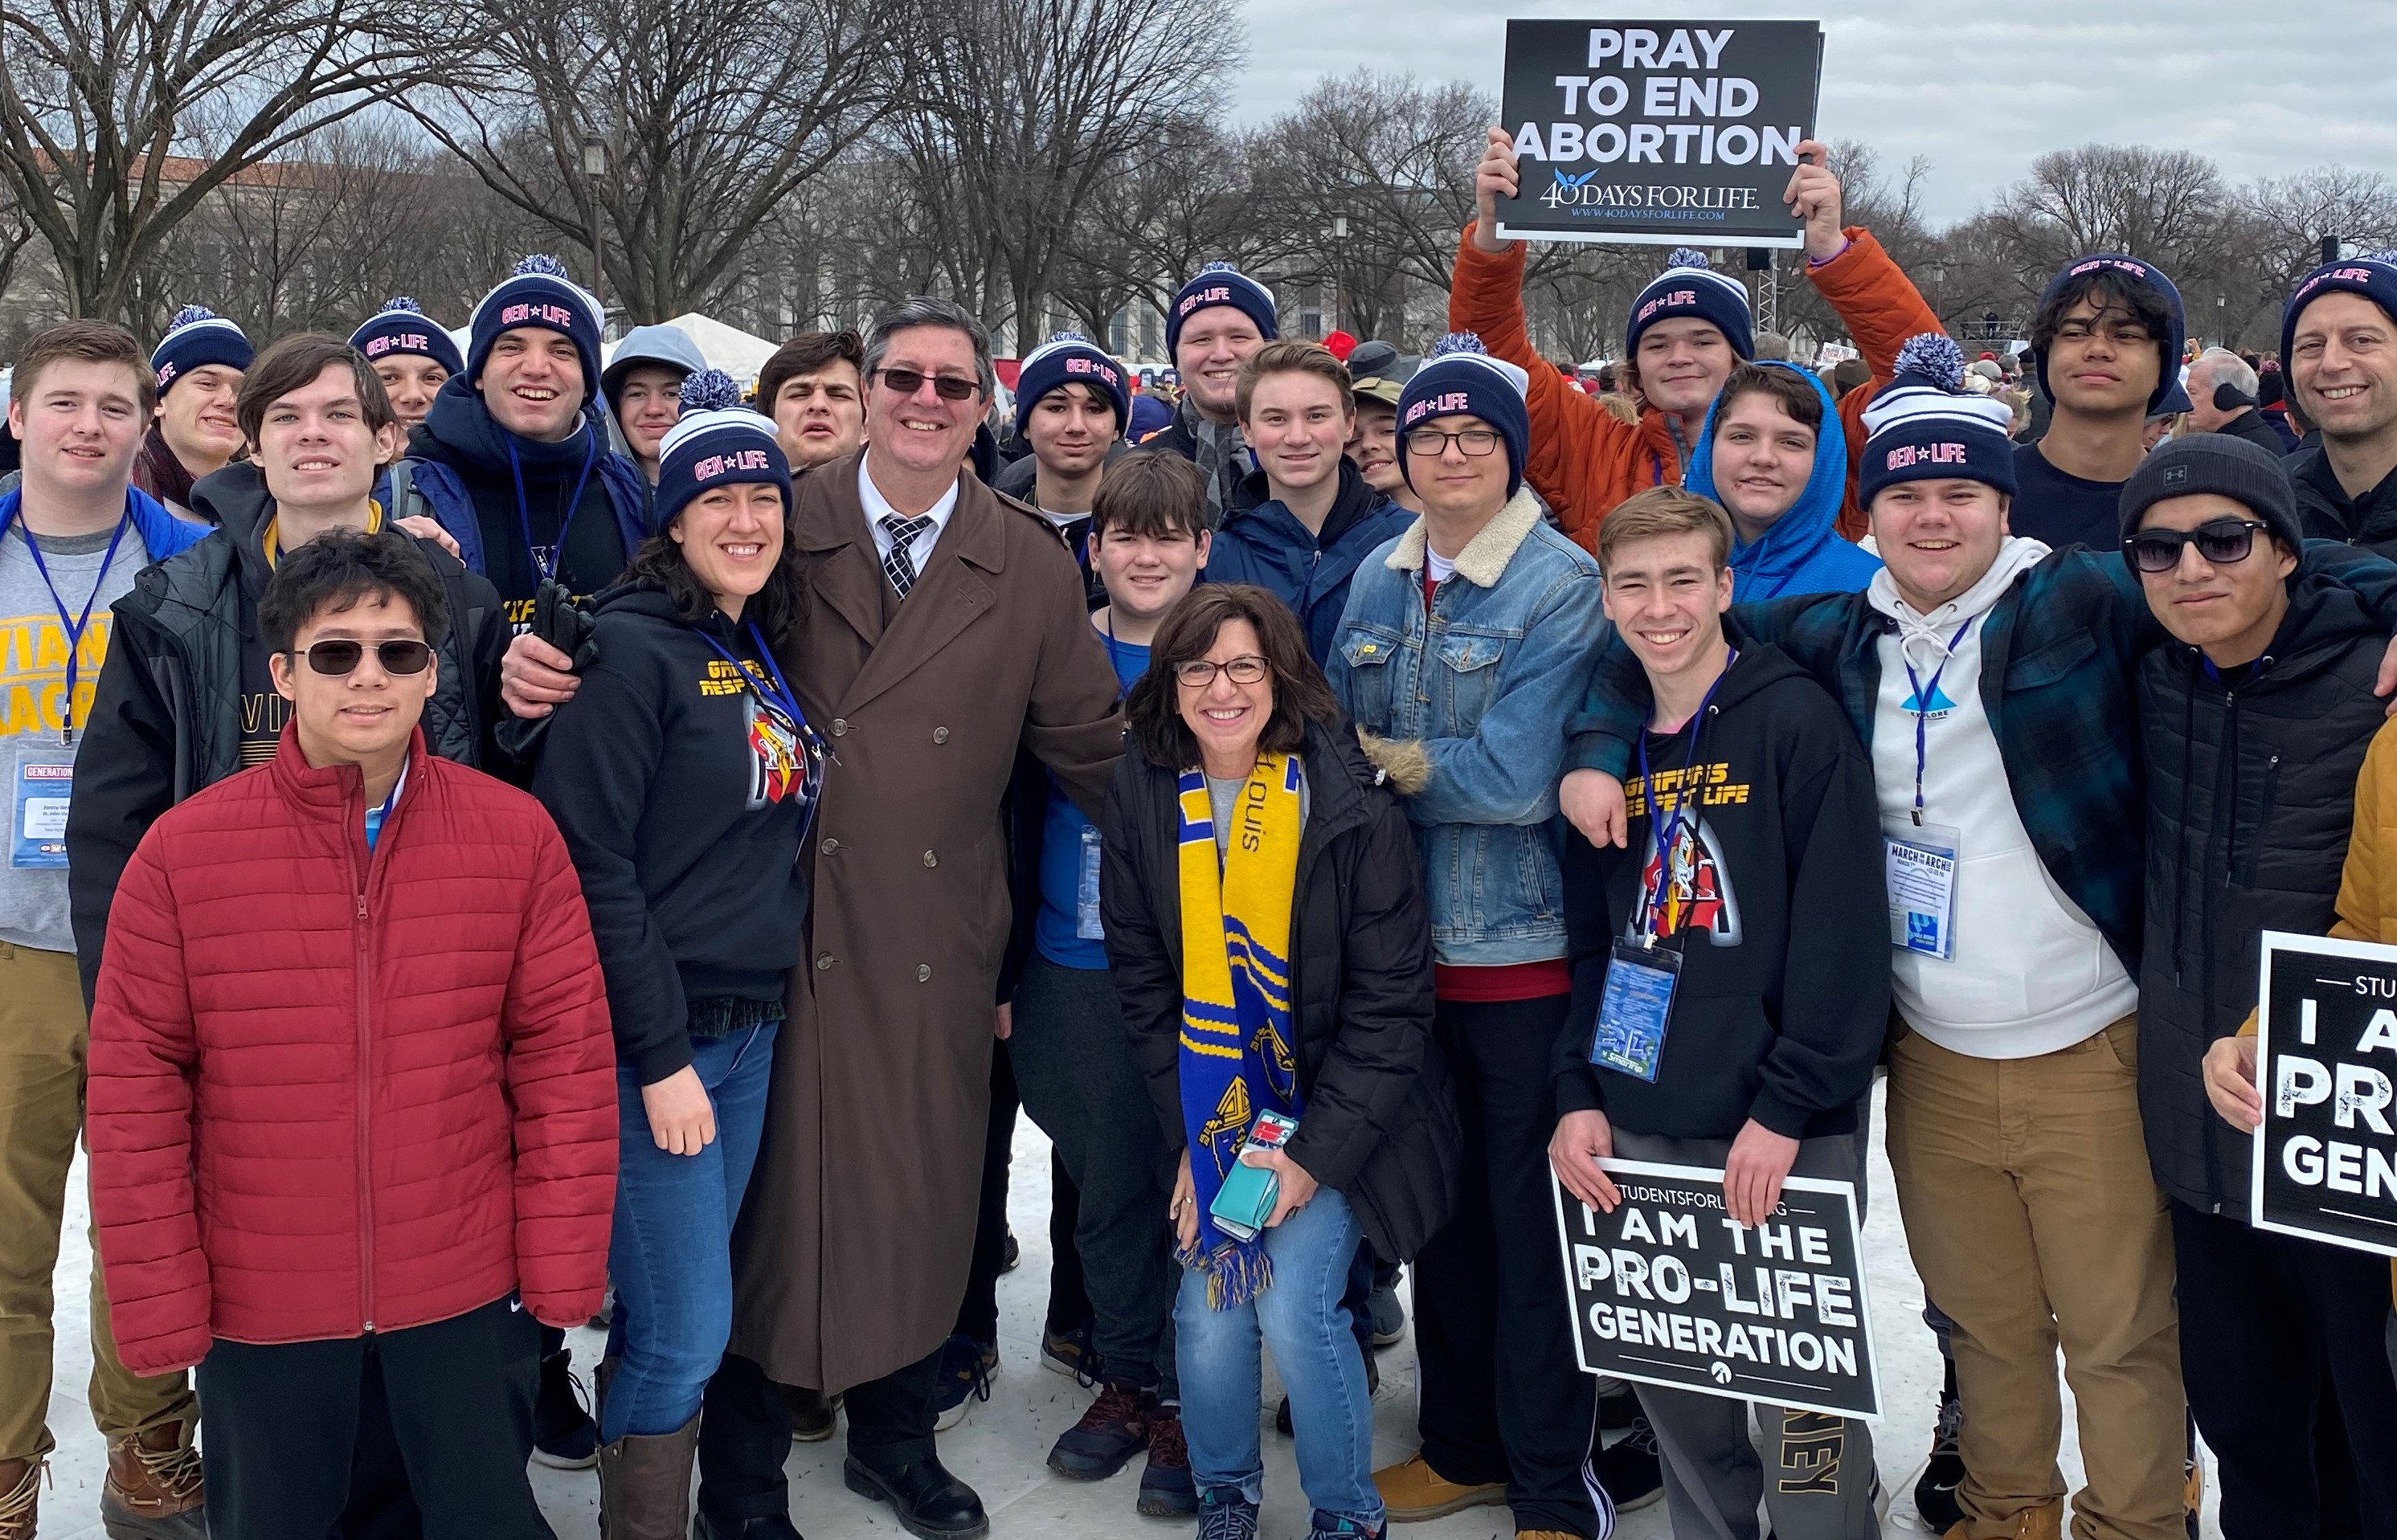 You are currently viewing Catholic Healthcare International At March For Life 2020